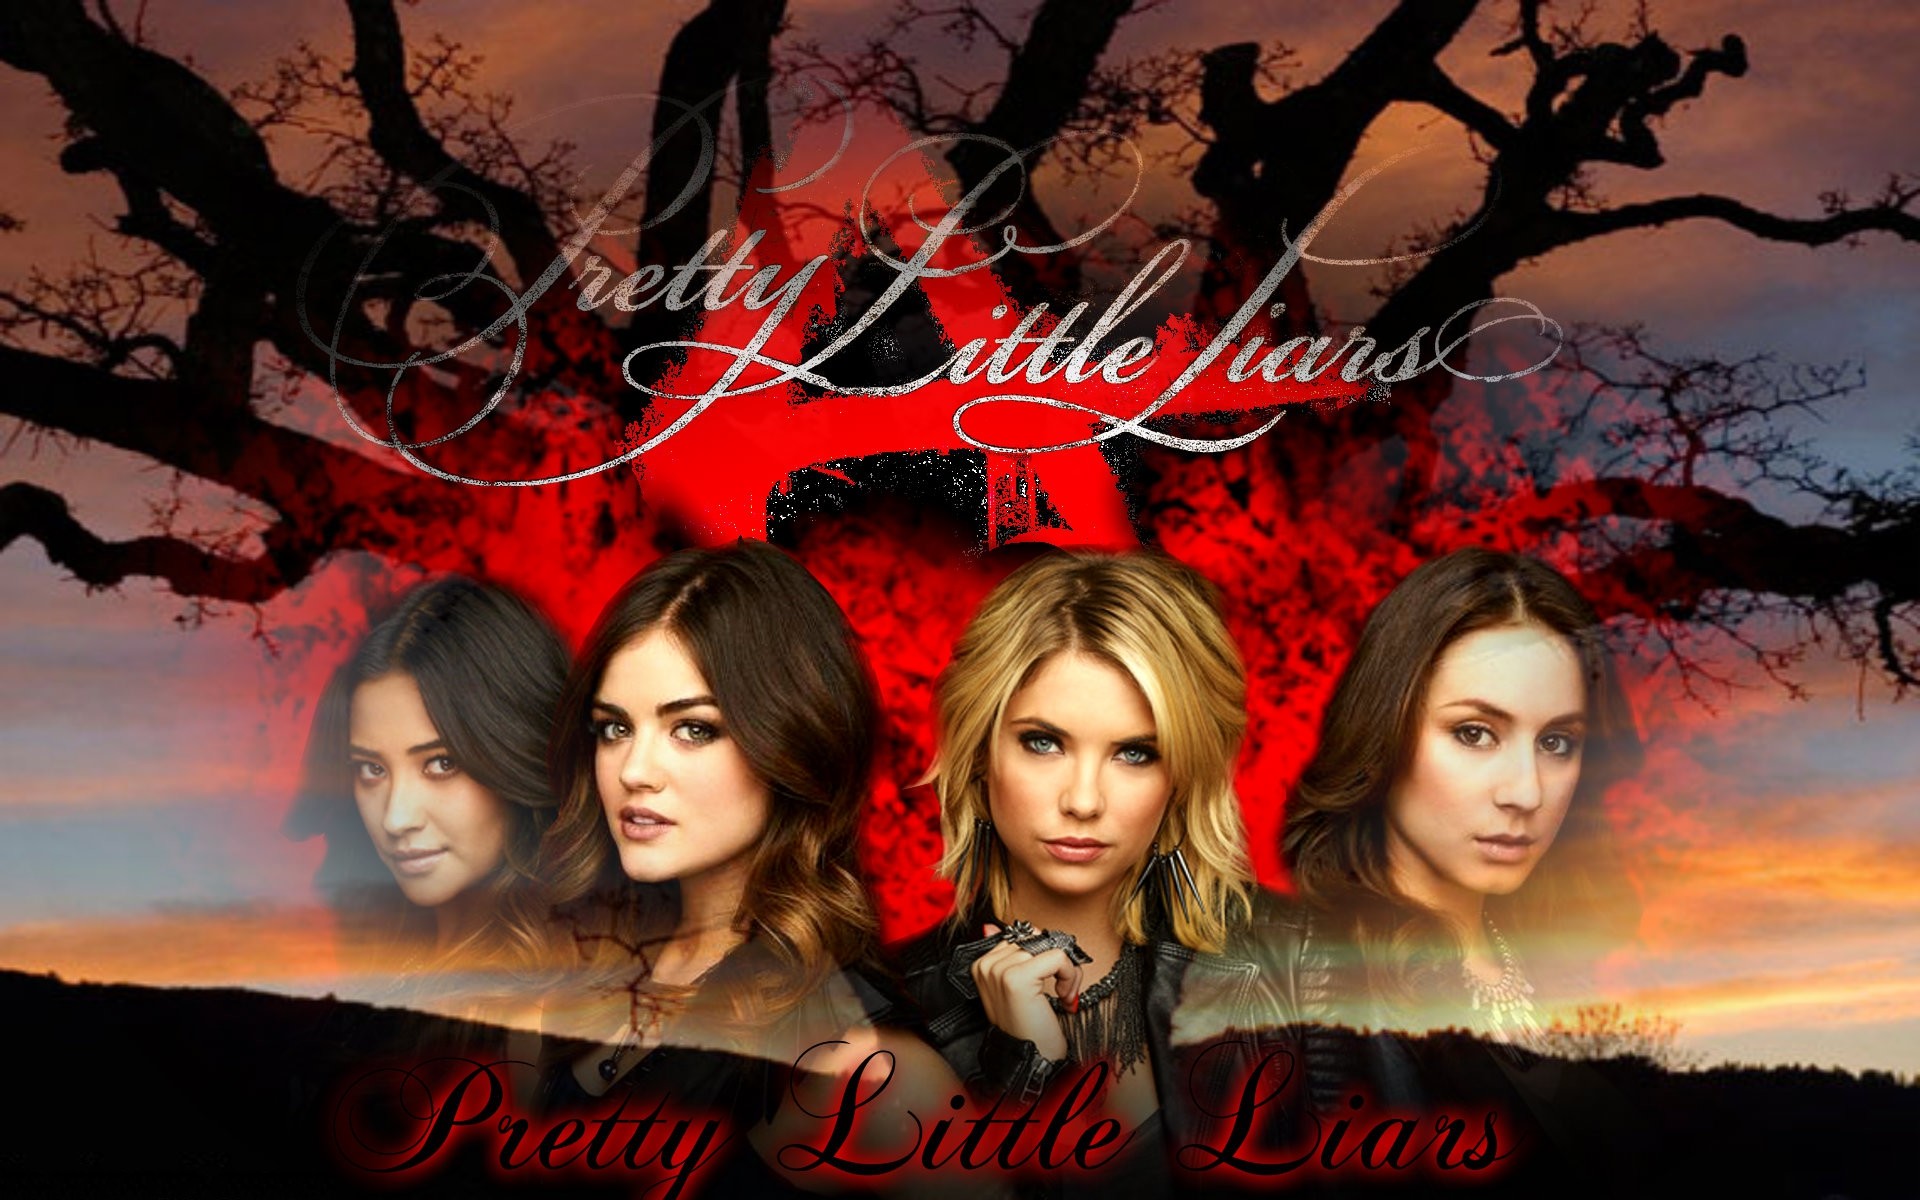 1920x1200 Pretty-Little-Liars-Images-1